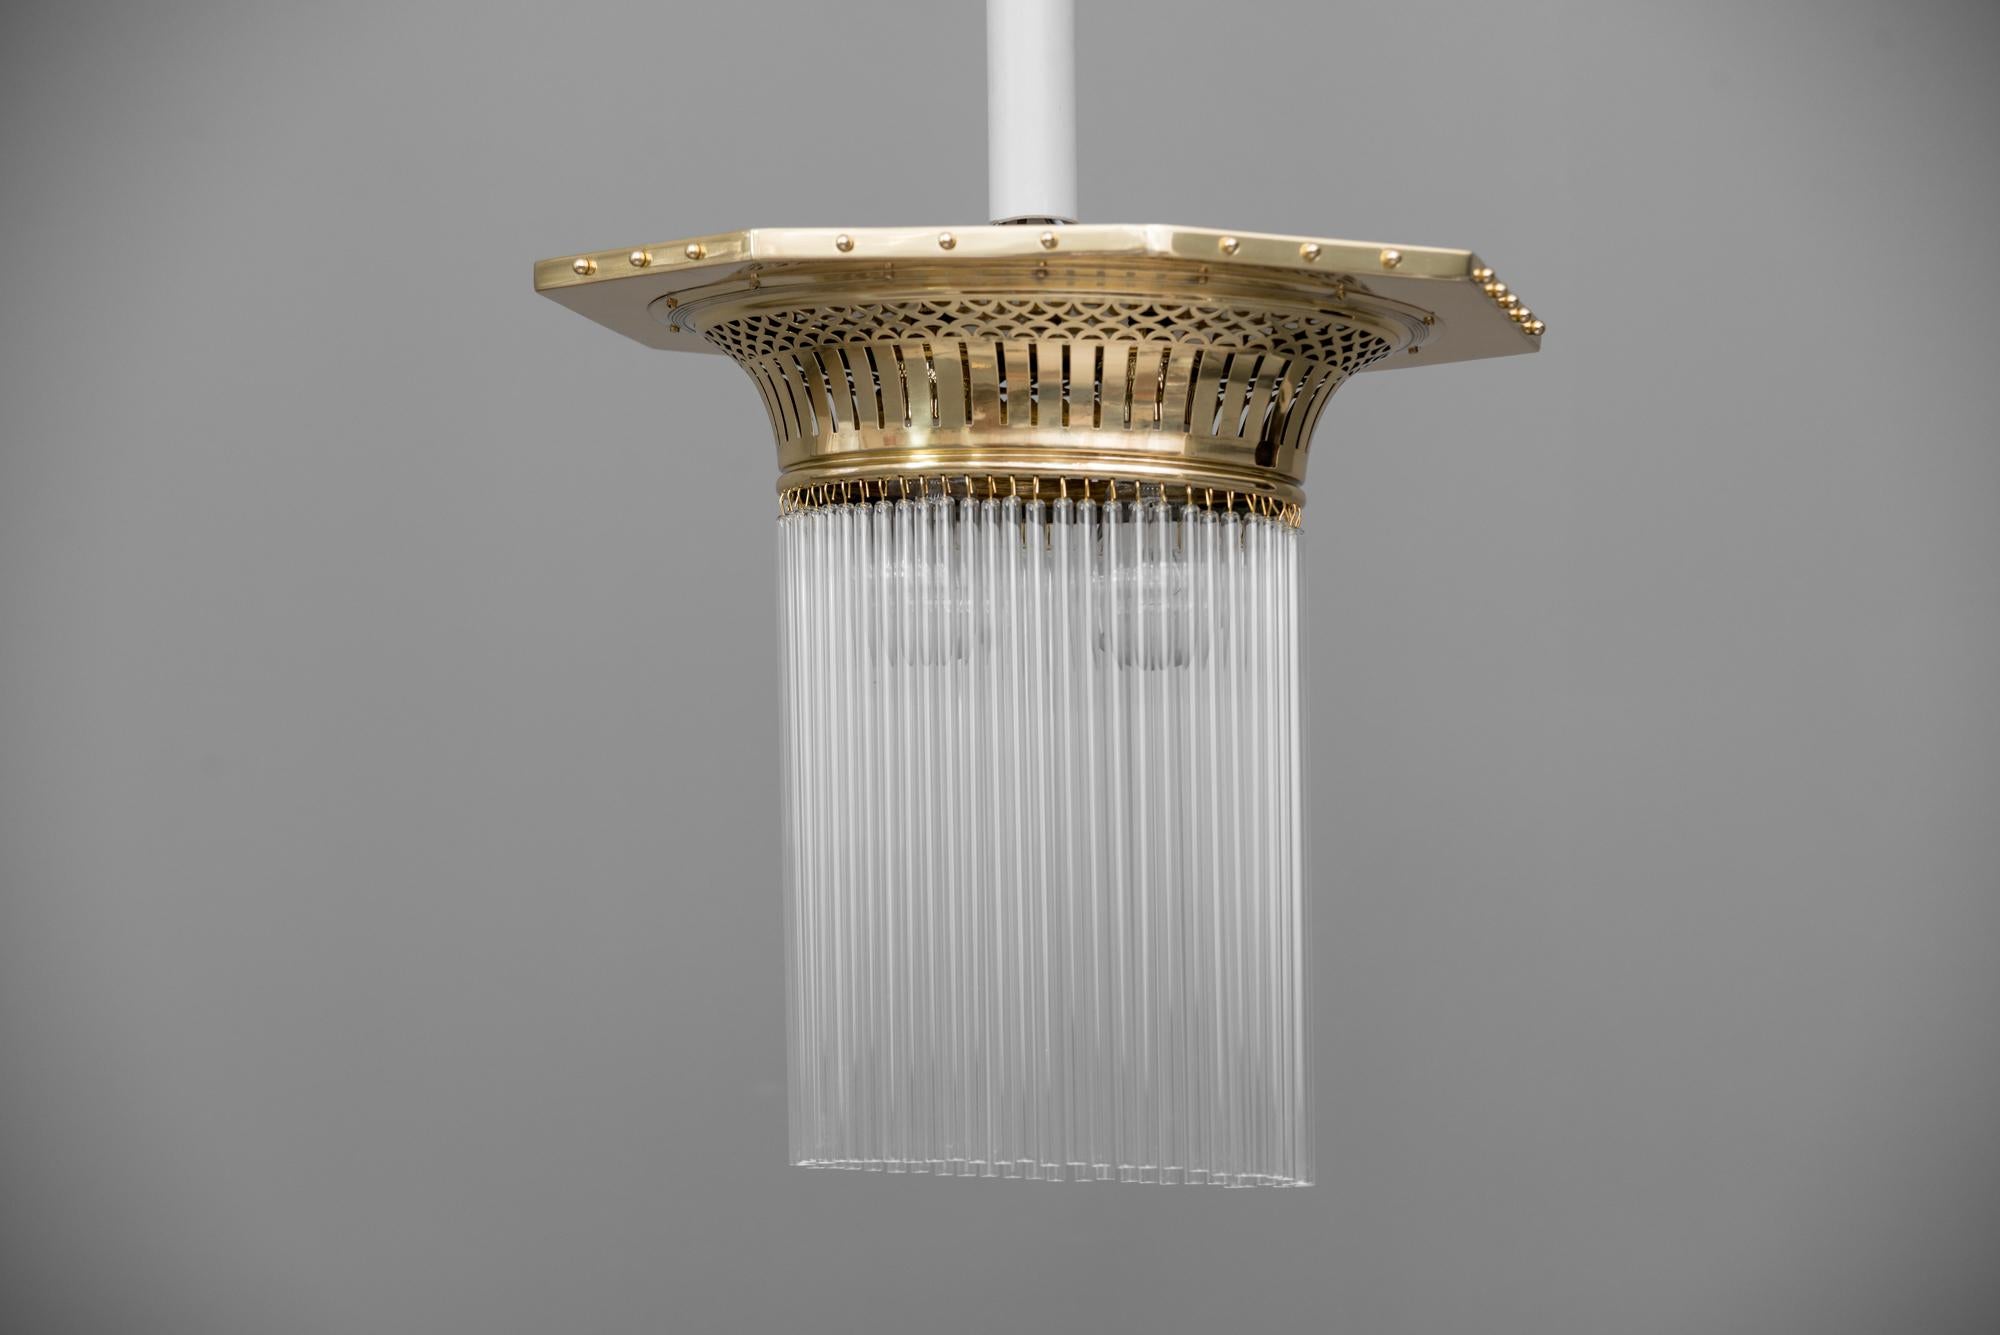 Art Deco ceiling lamp, circa 1920s
Polished and stove enameled
Glass sticks are replaced (new).